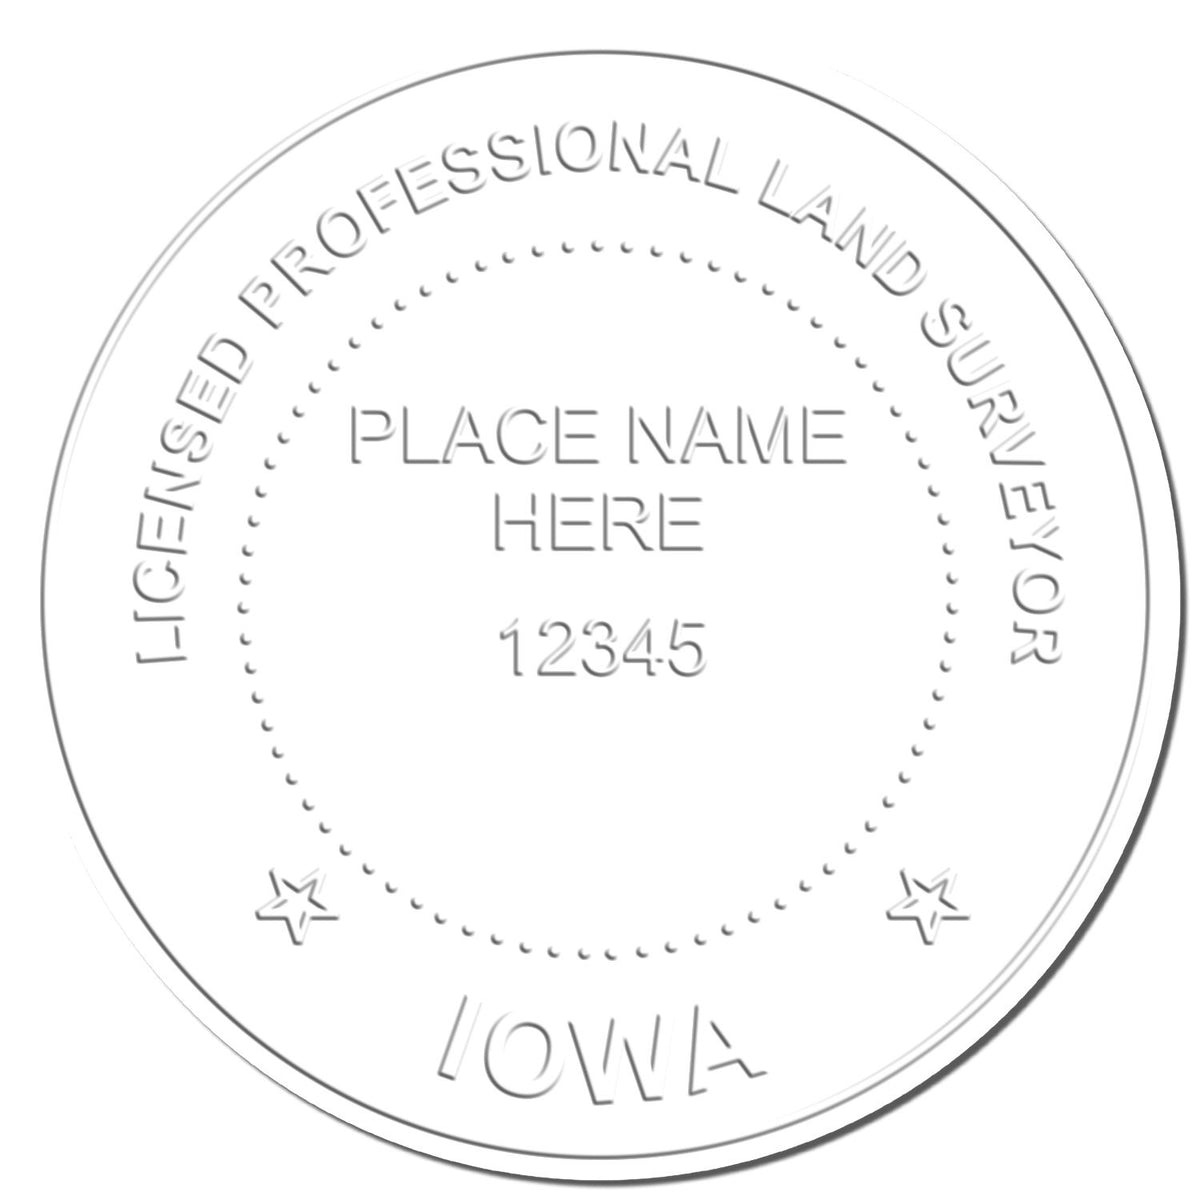 This paper is stamped with a sample imprint of the Gift Iowa Land Surveyor Seal, signifying its quality and reliability.